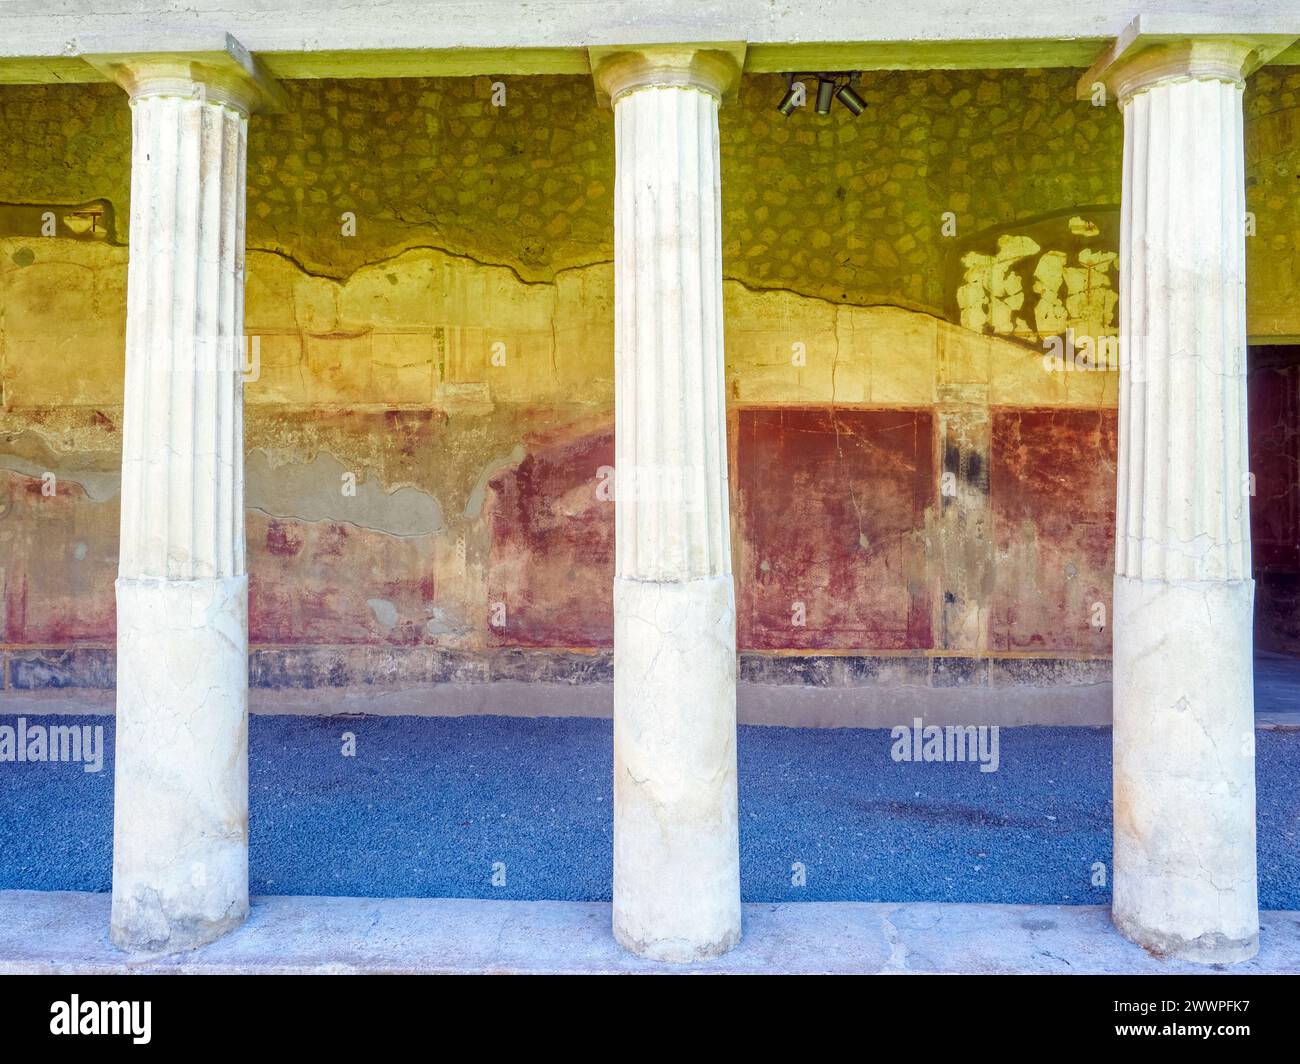 Peristyle (open courtyard or garden surrounded by a colonnade) - Oplontis known as Villa Poppaea in Torre Annunziata - Naples, Italy Stock Photo